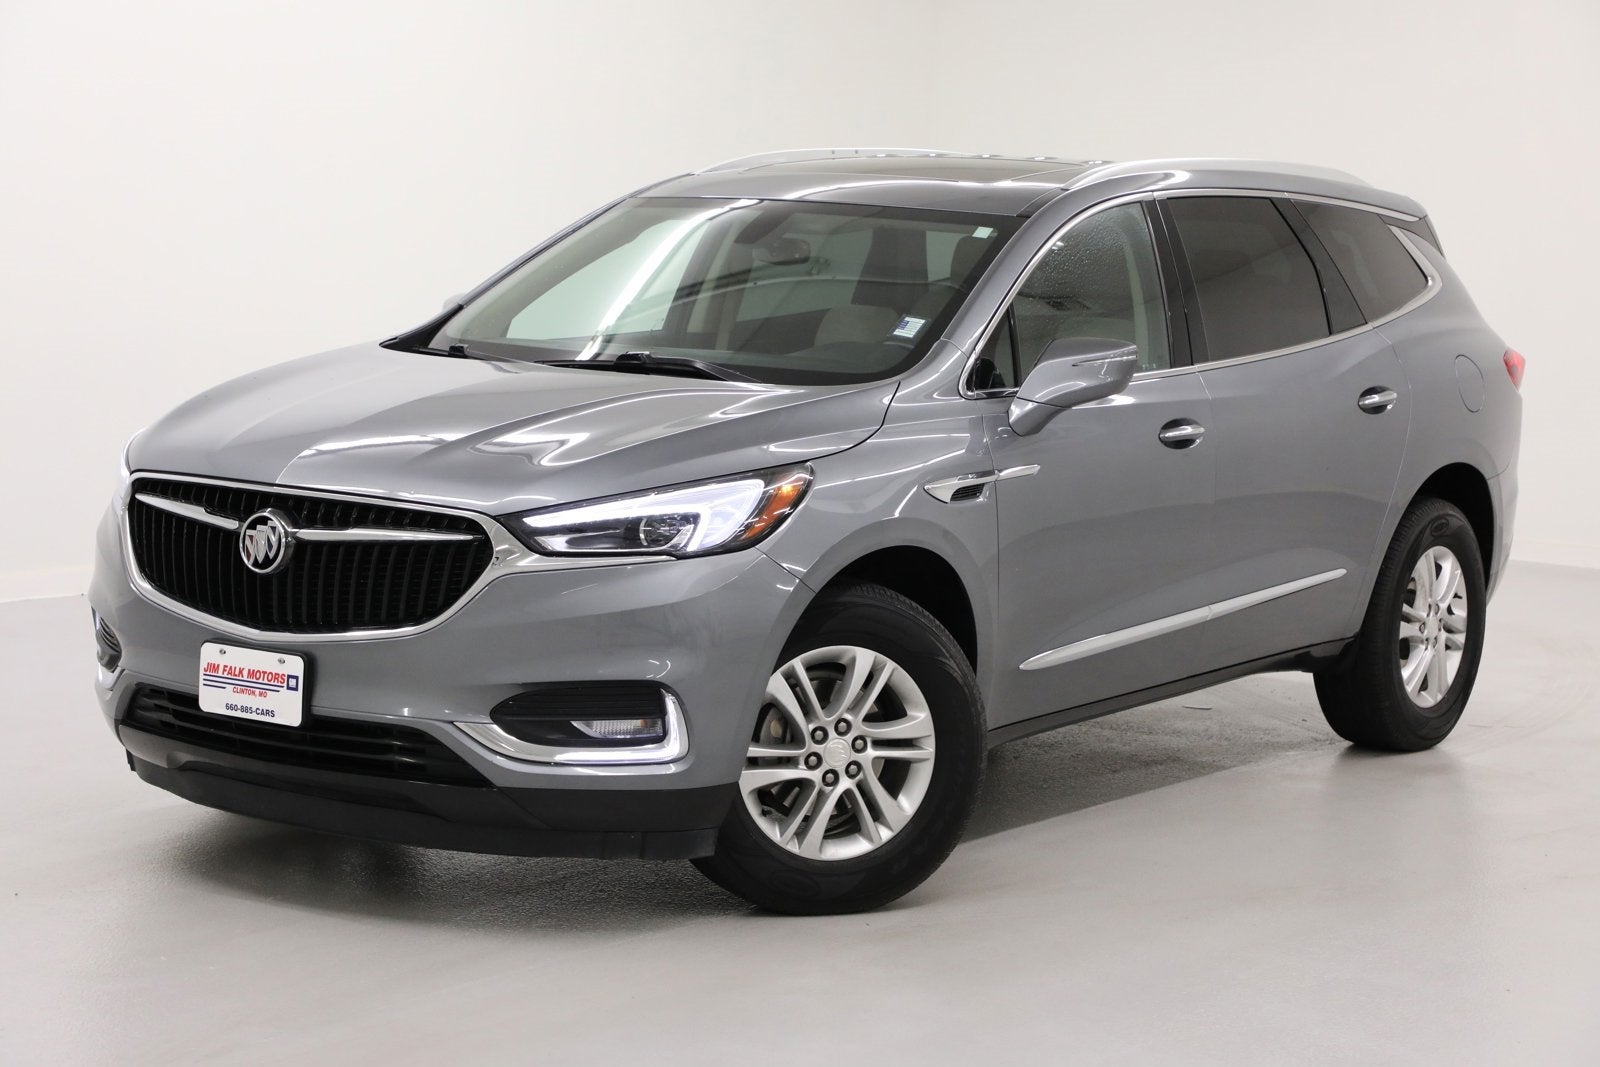 2019 Buick Enclave Essence Sunroof Heated Leather Seats HandsFree Liftgate Dual Zone AC Bluetooth Remote Start Cruise